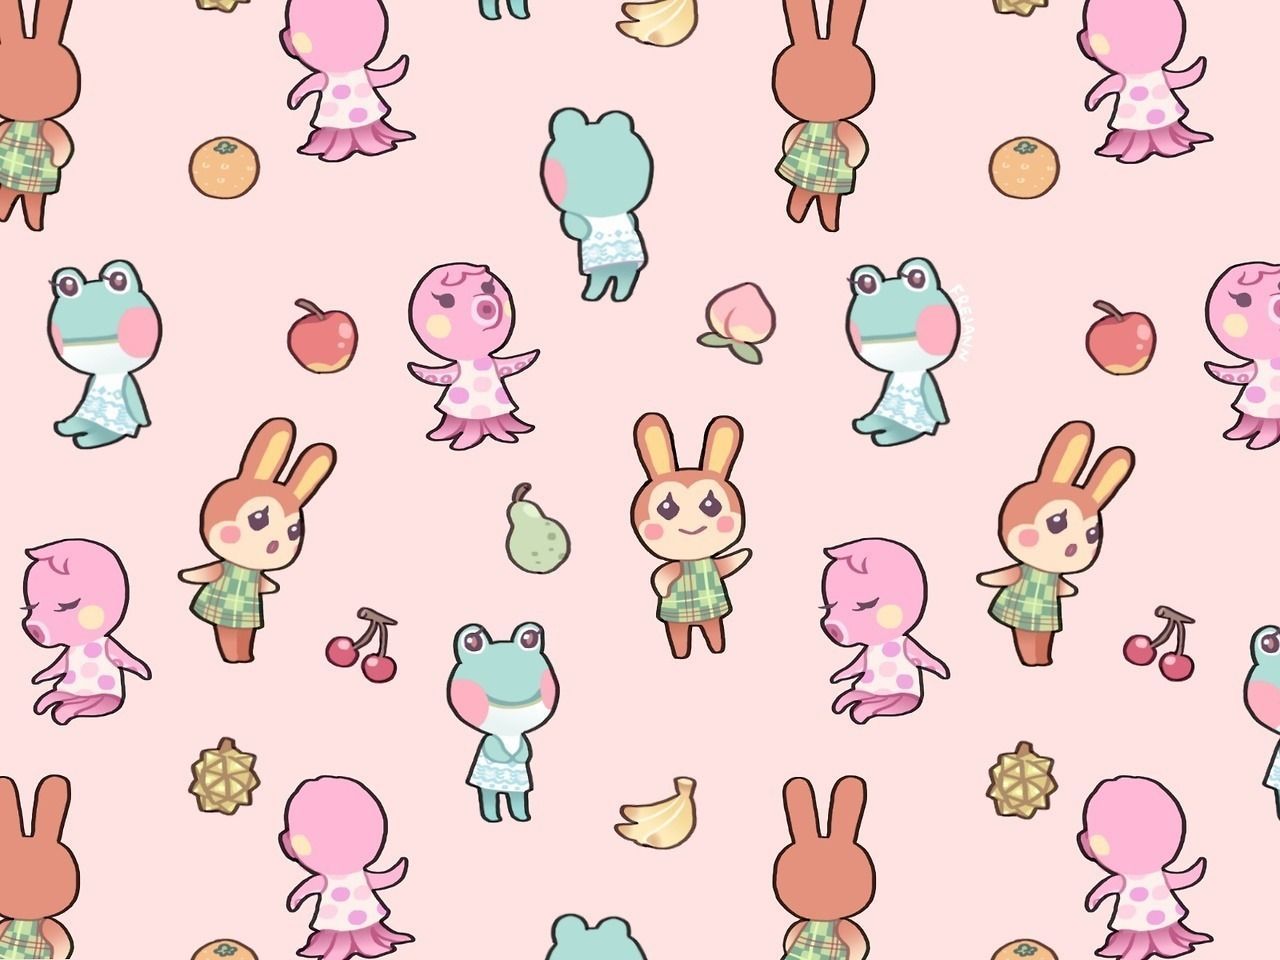 A pattern of animal characters on pink background - Animal Crossing